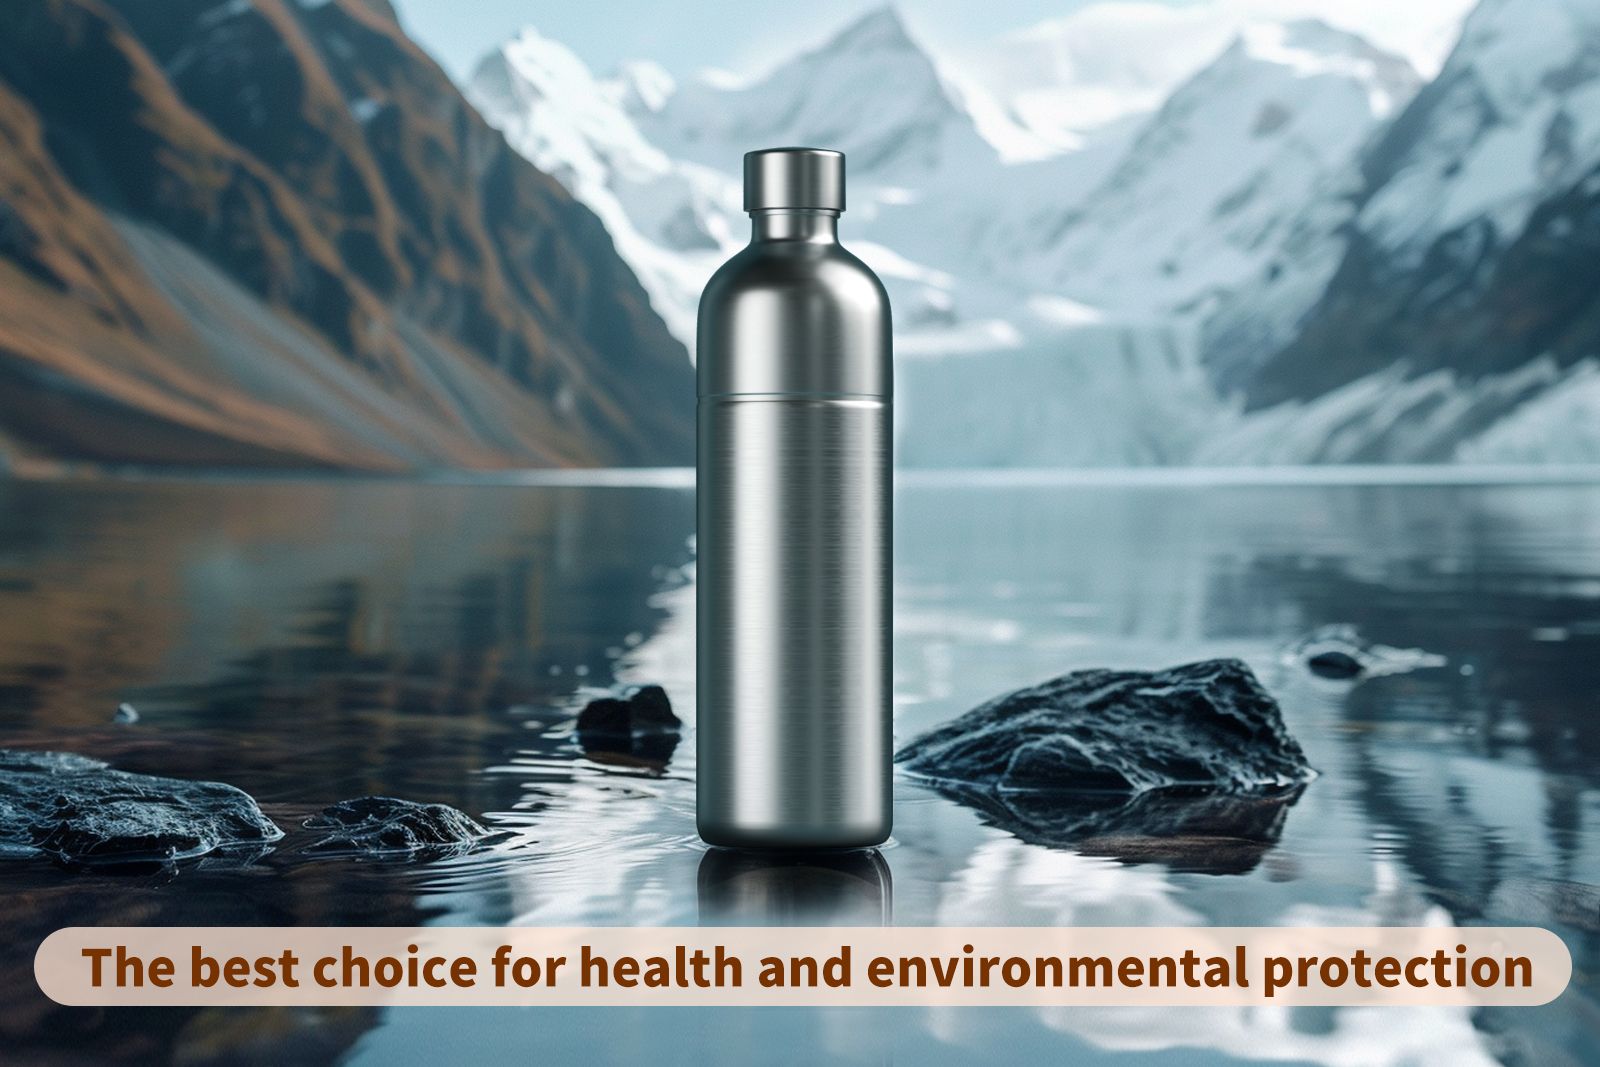 STAINLESS STEEL SODA BOTTLE: A NEW HEALTHY AND ENVIRONMENTALLY FRIENDLY CHOICE